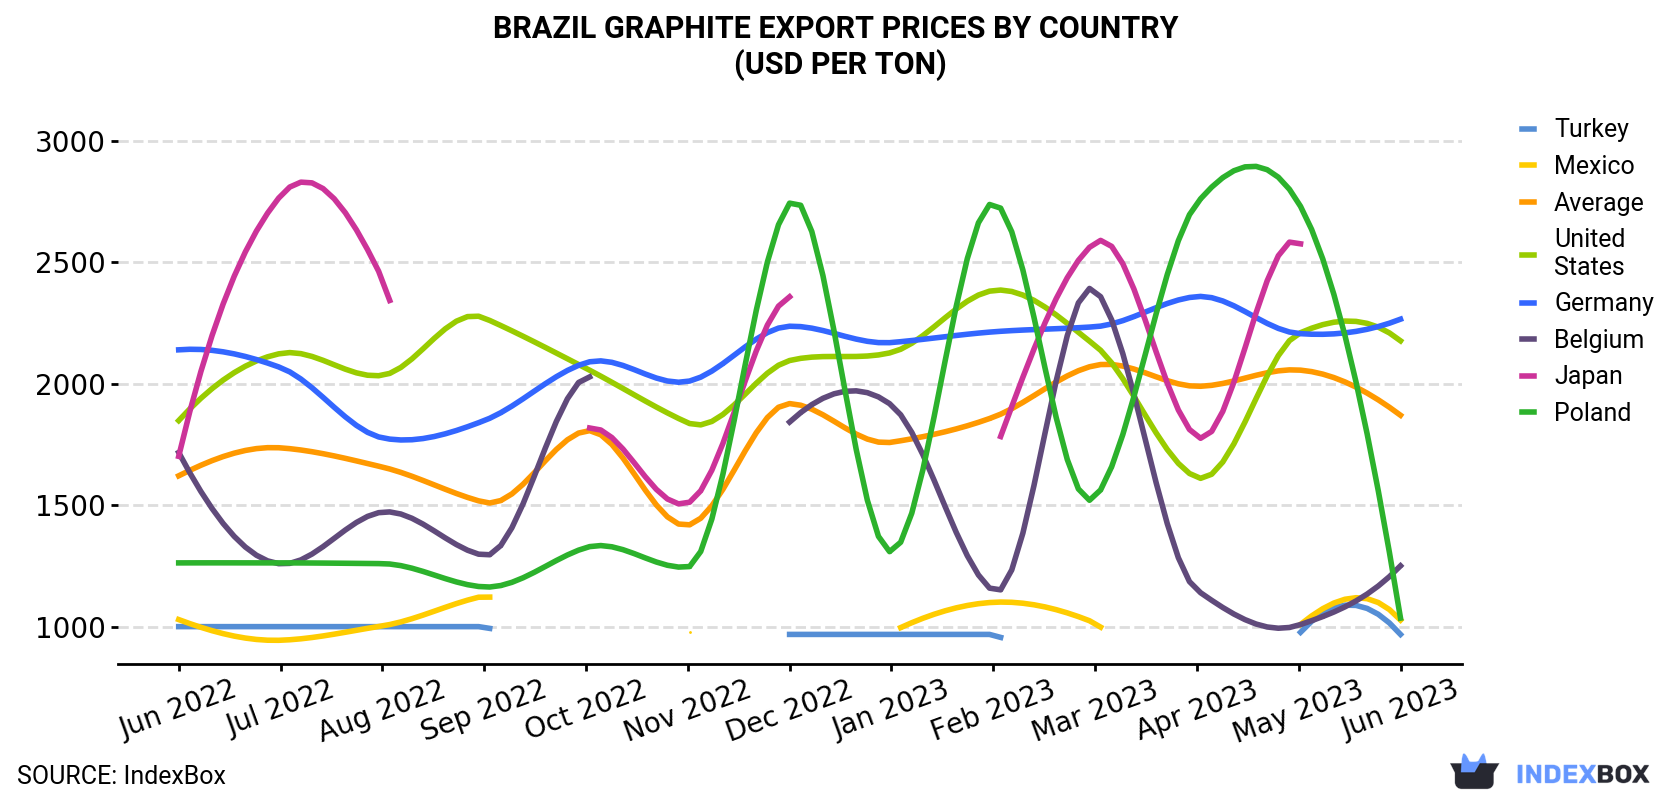 Brazil Graphite Export Prices By Country (USD Per Ton)